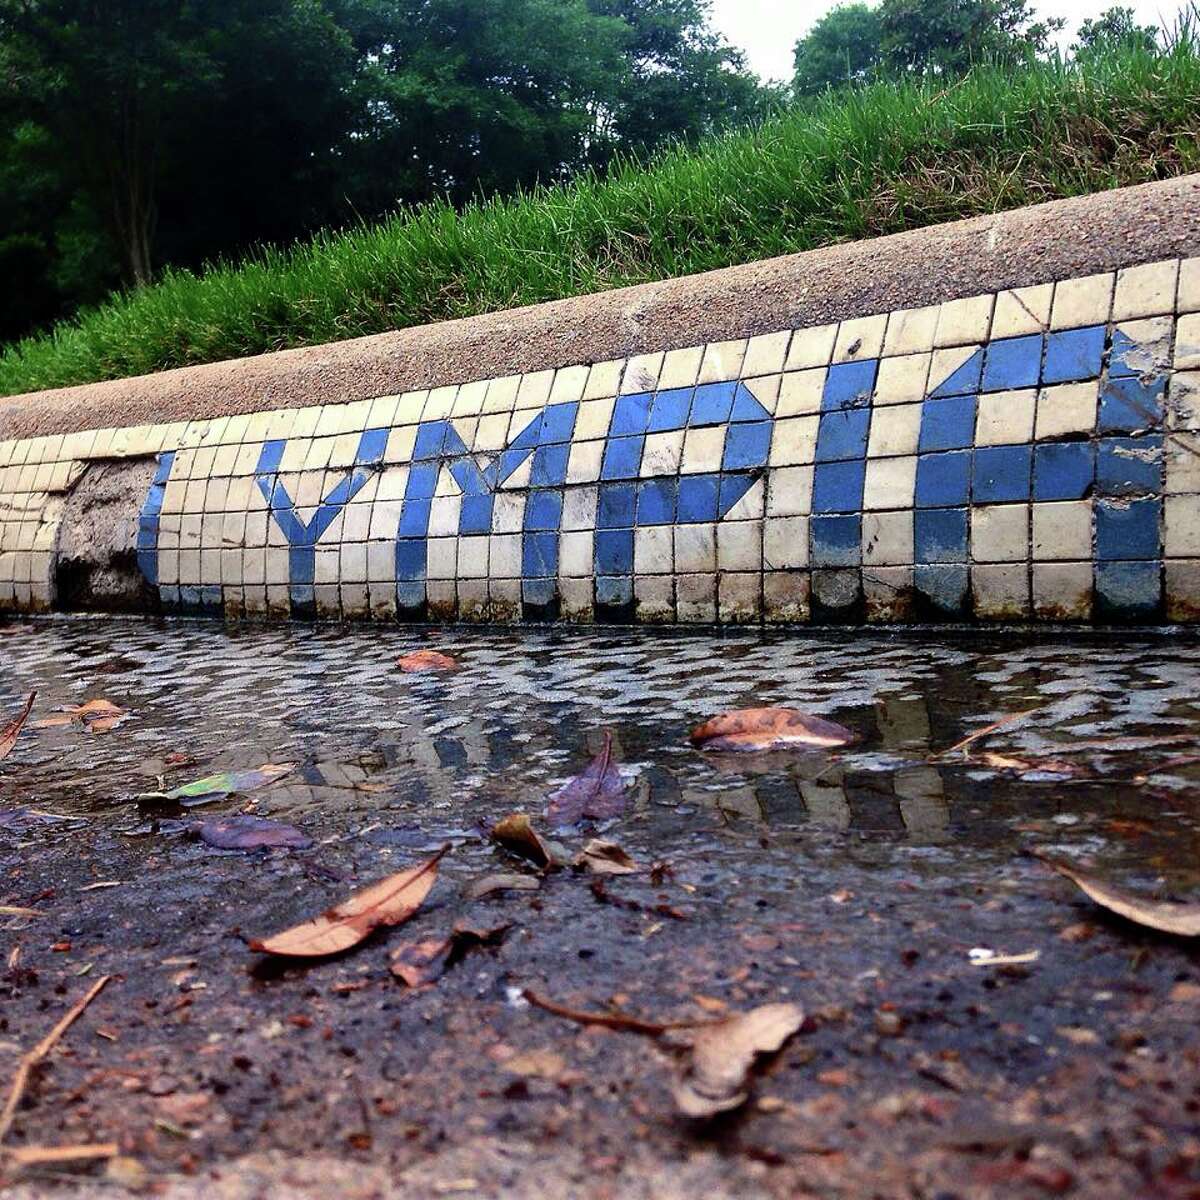 Houston resident Joey Sanchez is on a mission to locate and document every one of Houston’s surviving vintage blue curb tiles. Some were installed nearly a century ago and most have been lost to urban development. Sanchez takes photo submissions via his official website and an Instagram hash tag, #BlueTileProject.